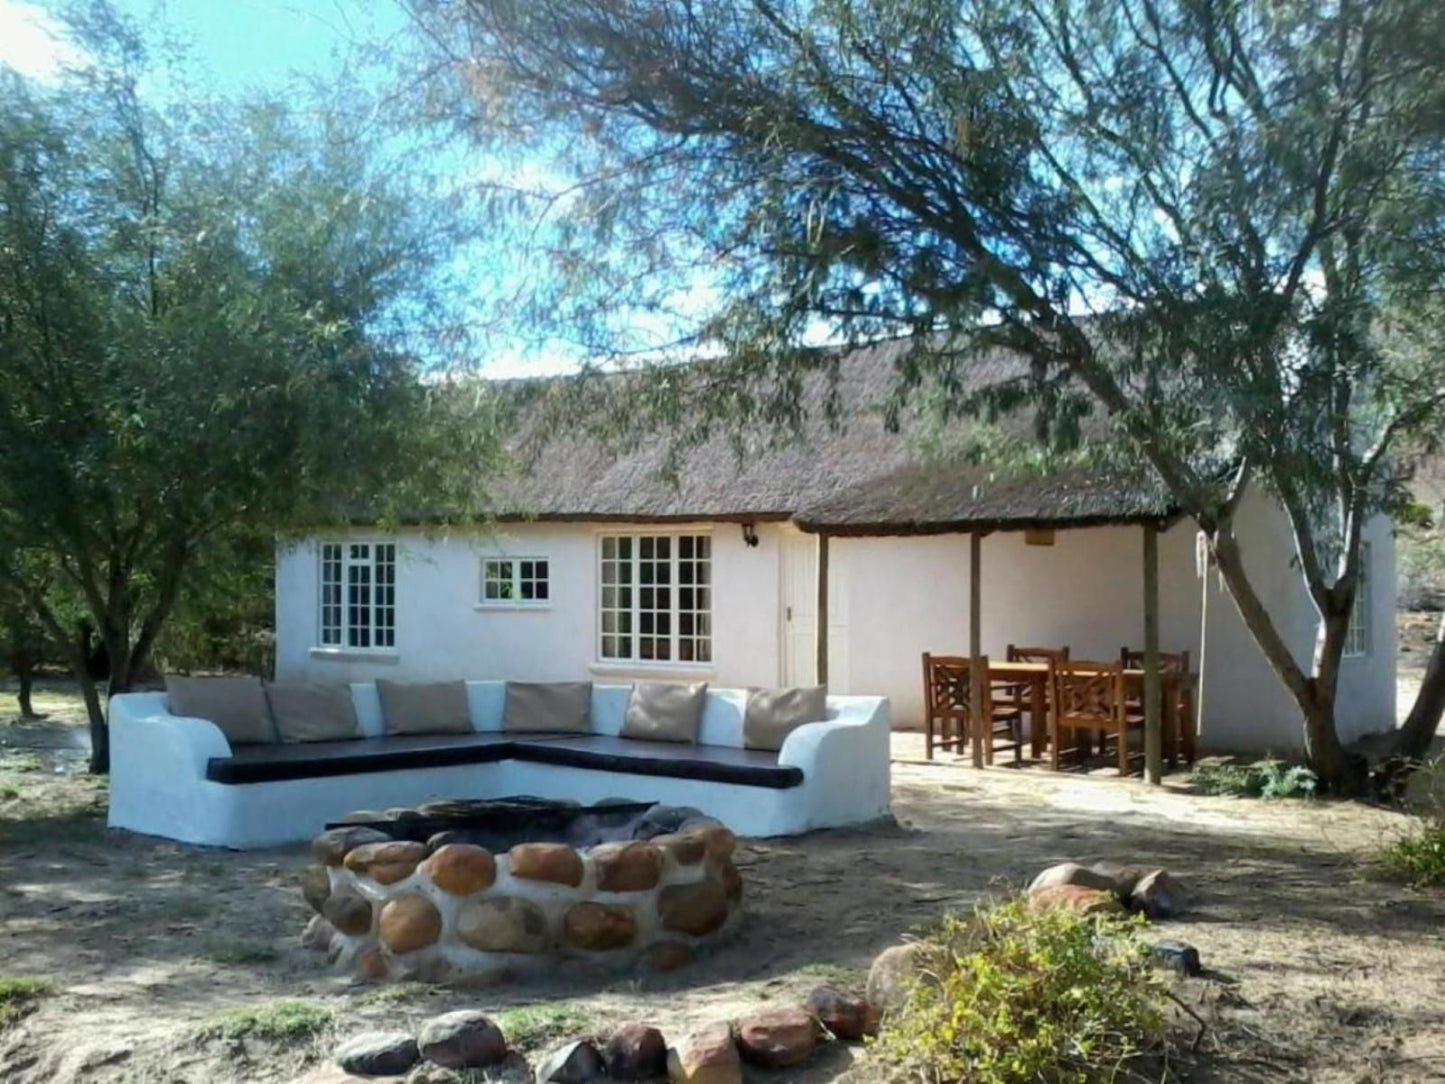 Enjo Nature Farm Clanwilliam Western Cape South Africa House, Building, Architecture